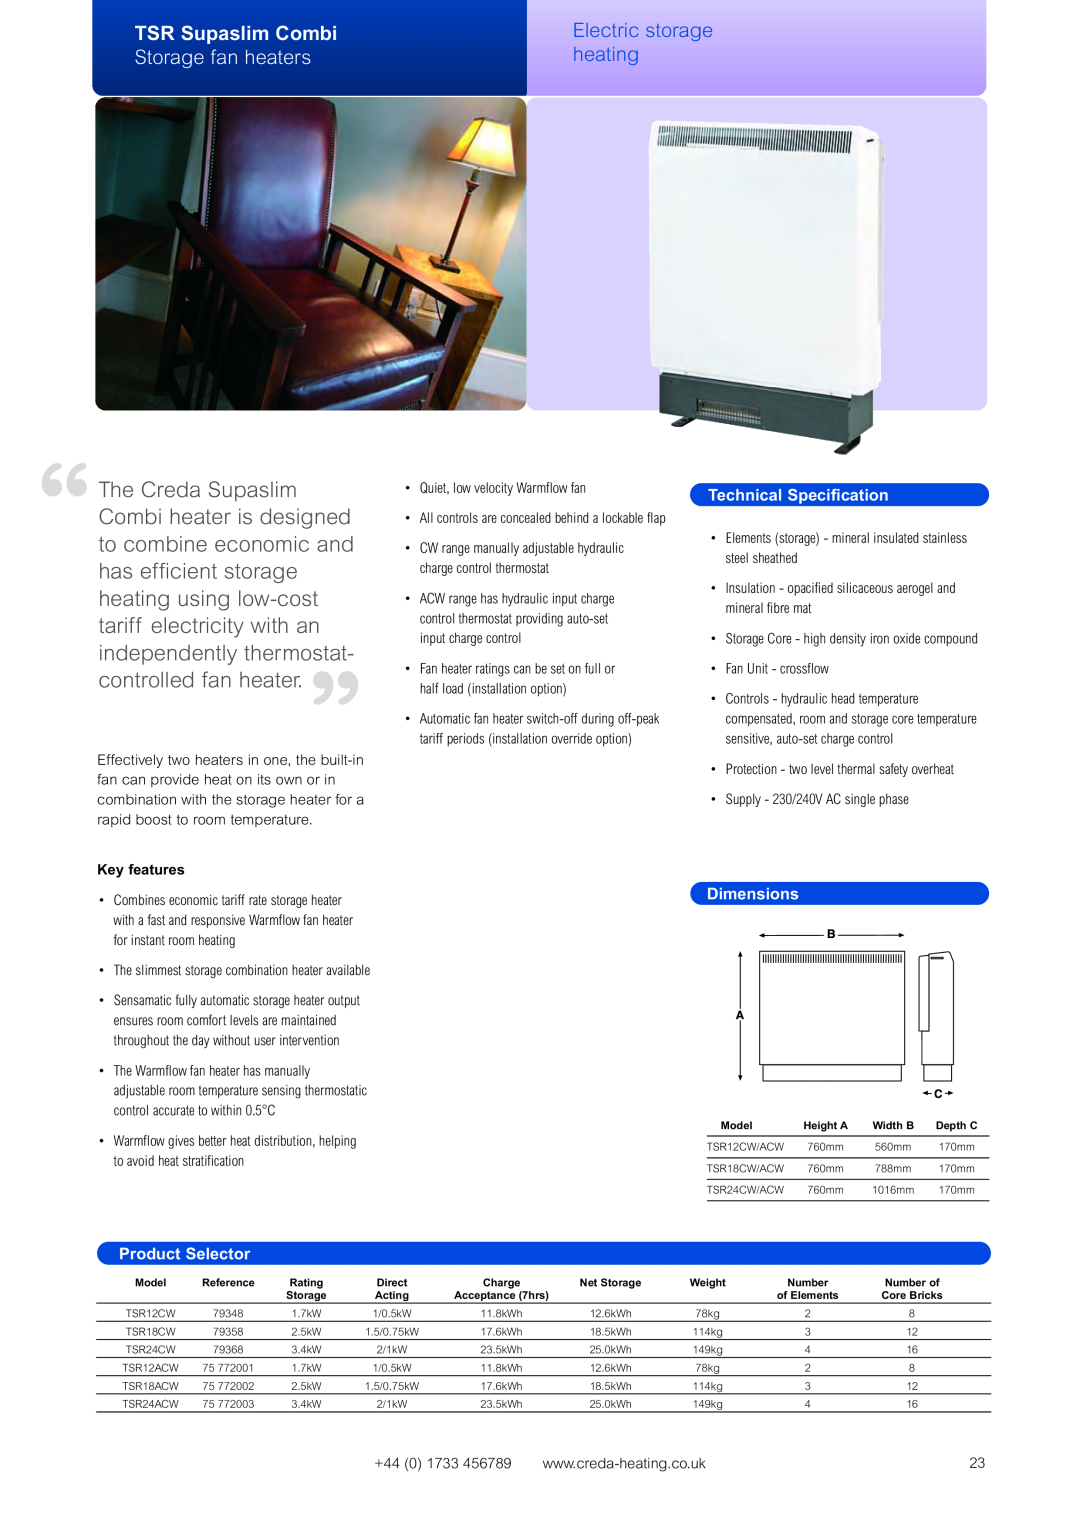 Creda SFH24AW independently thermostat- controlled fan heater. ”, TSR Supaslim Combi, Storage fan heaters, Dimensions 